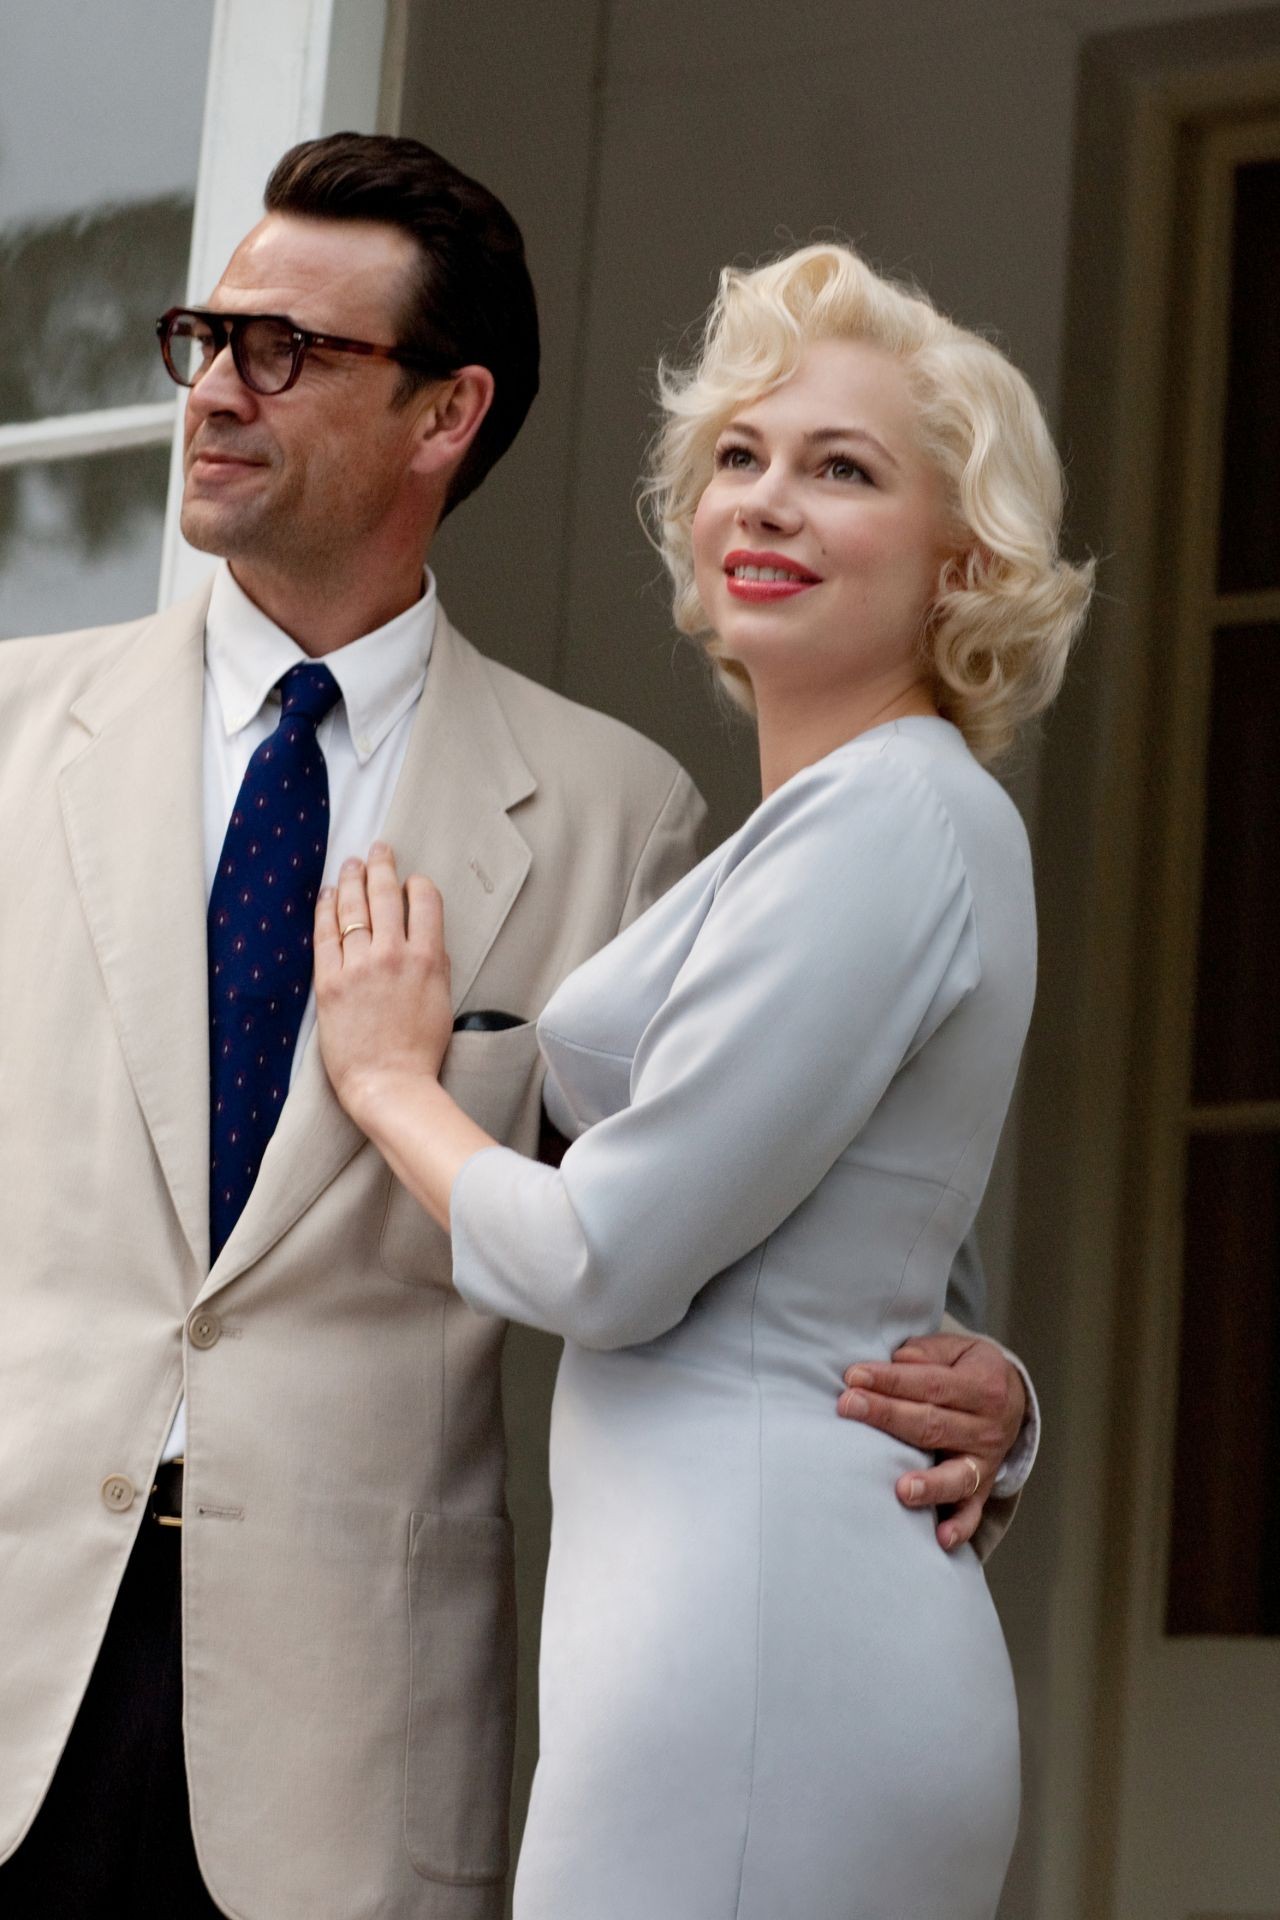 Dougray Scott stars as Arthur Miller and Michelle Williams stars as Marilyn Monroe in The Weinstein Company's My Week with Marilyn (2011). Photo credit by Laurence Cendrowicz.